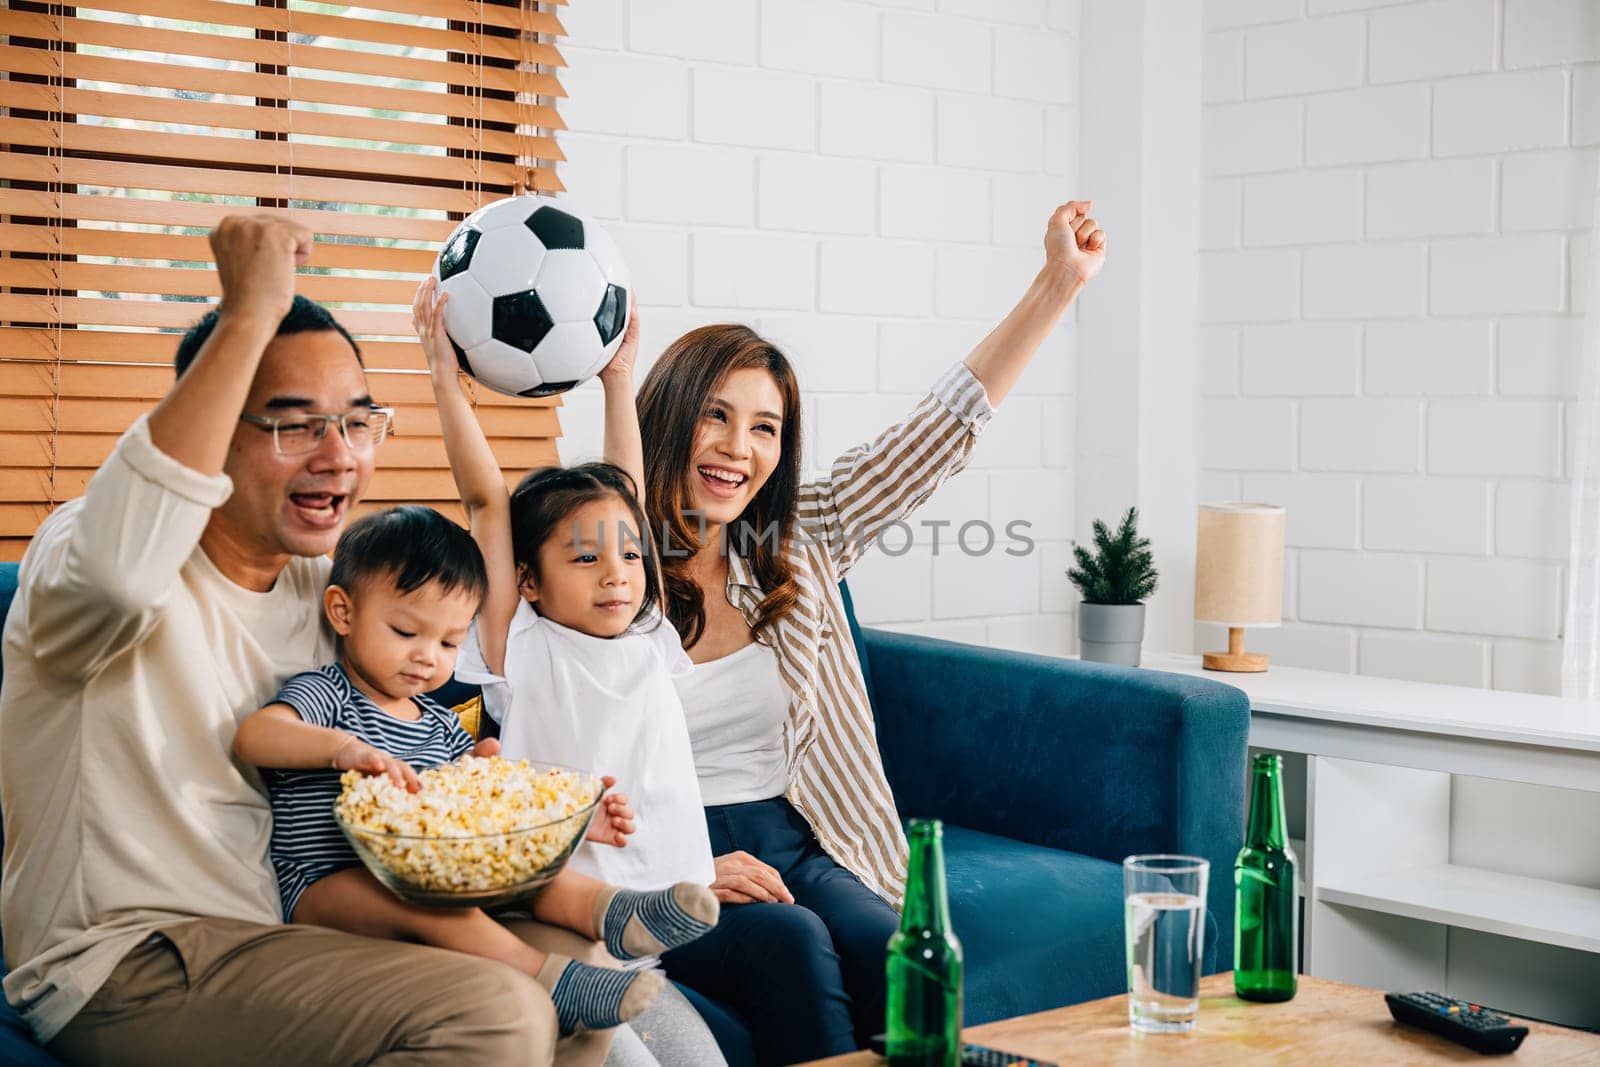 A jubilant family watches a football match with popcorn and a ball, raising arms and celebrating. Their togetherness and cheers reflect the joy of winning and their shared love for the sport.